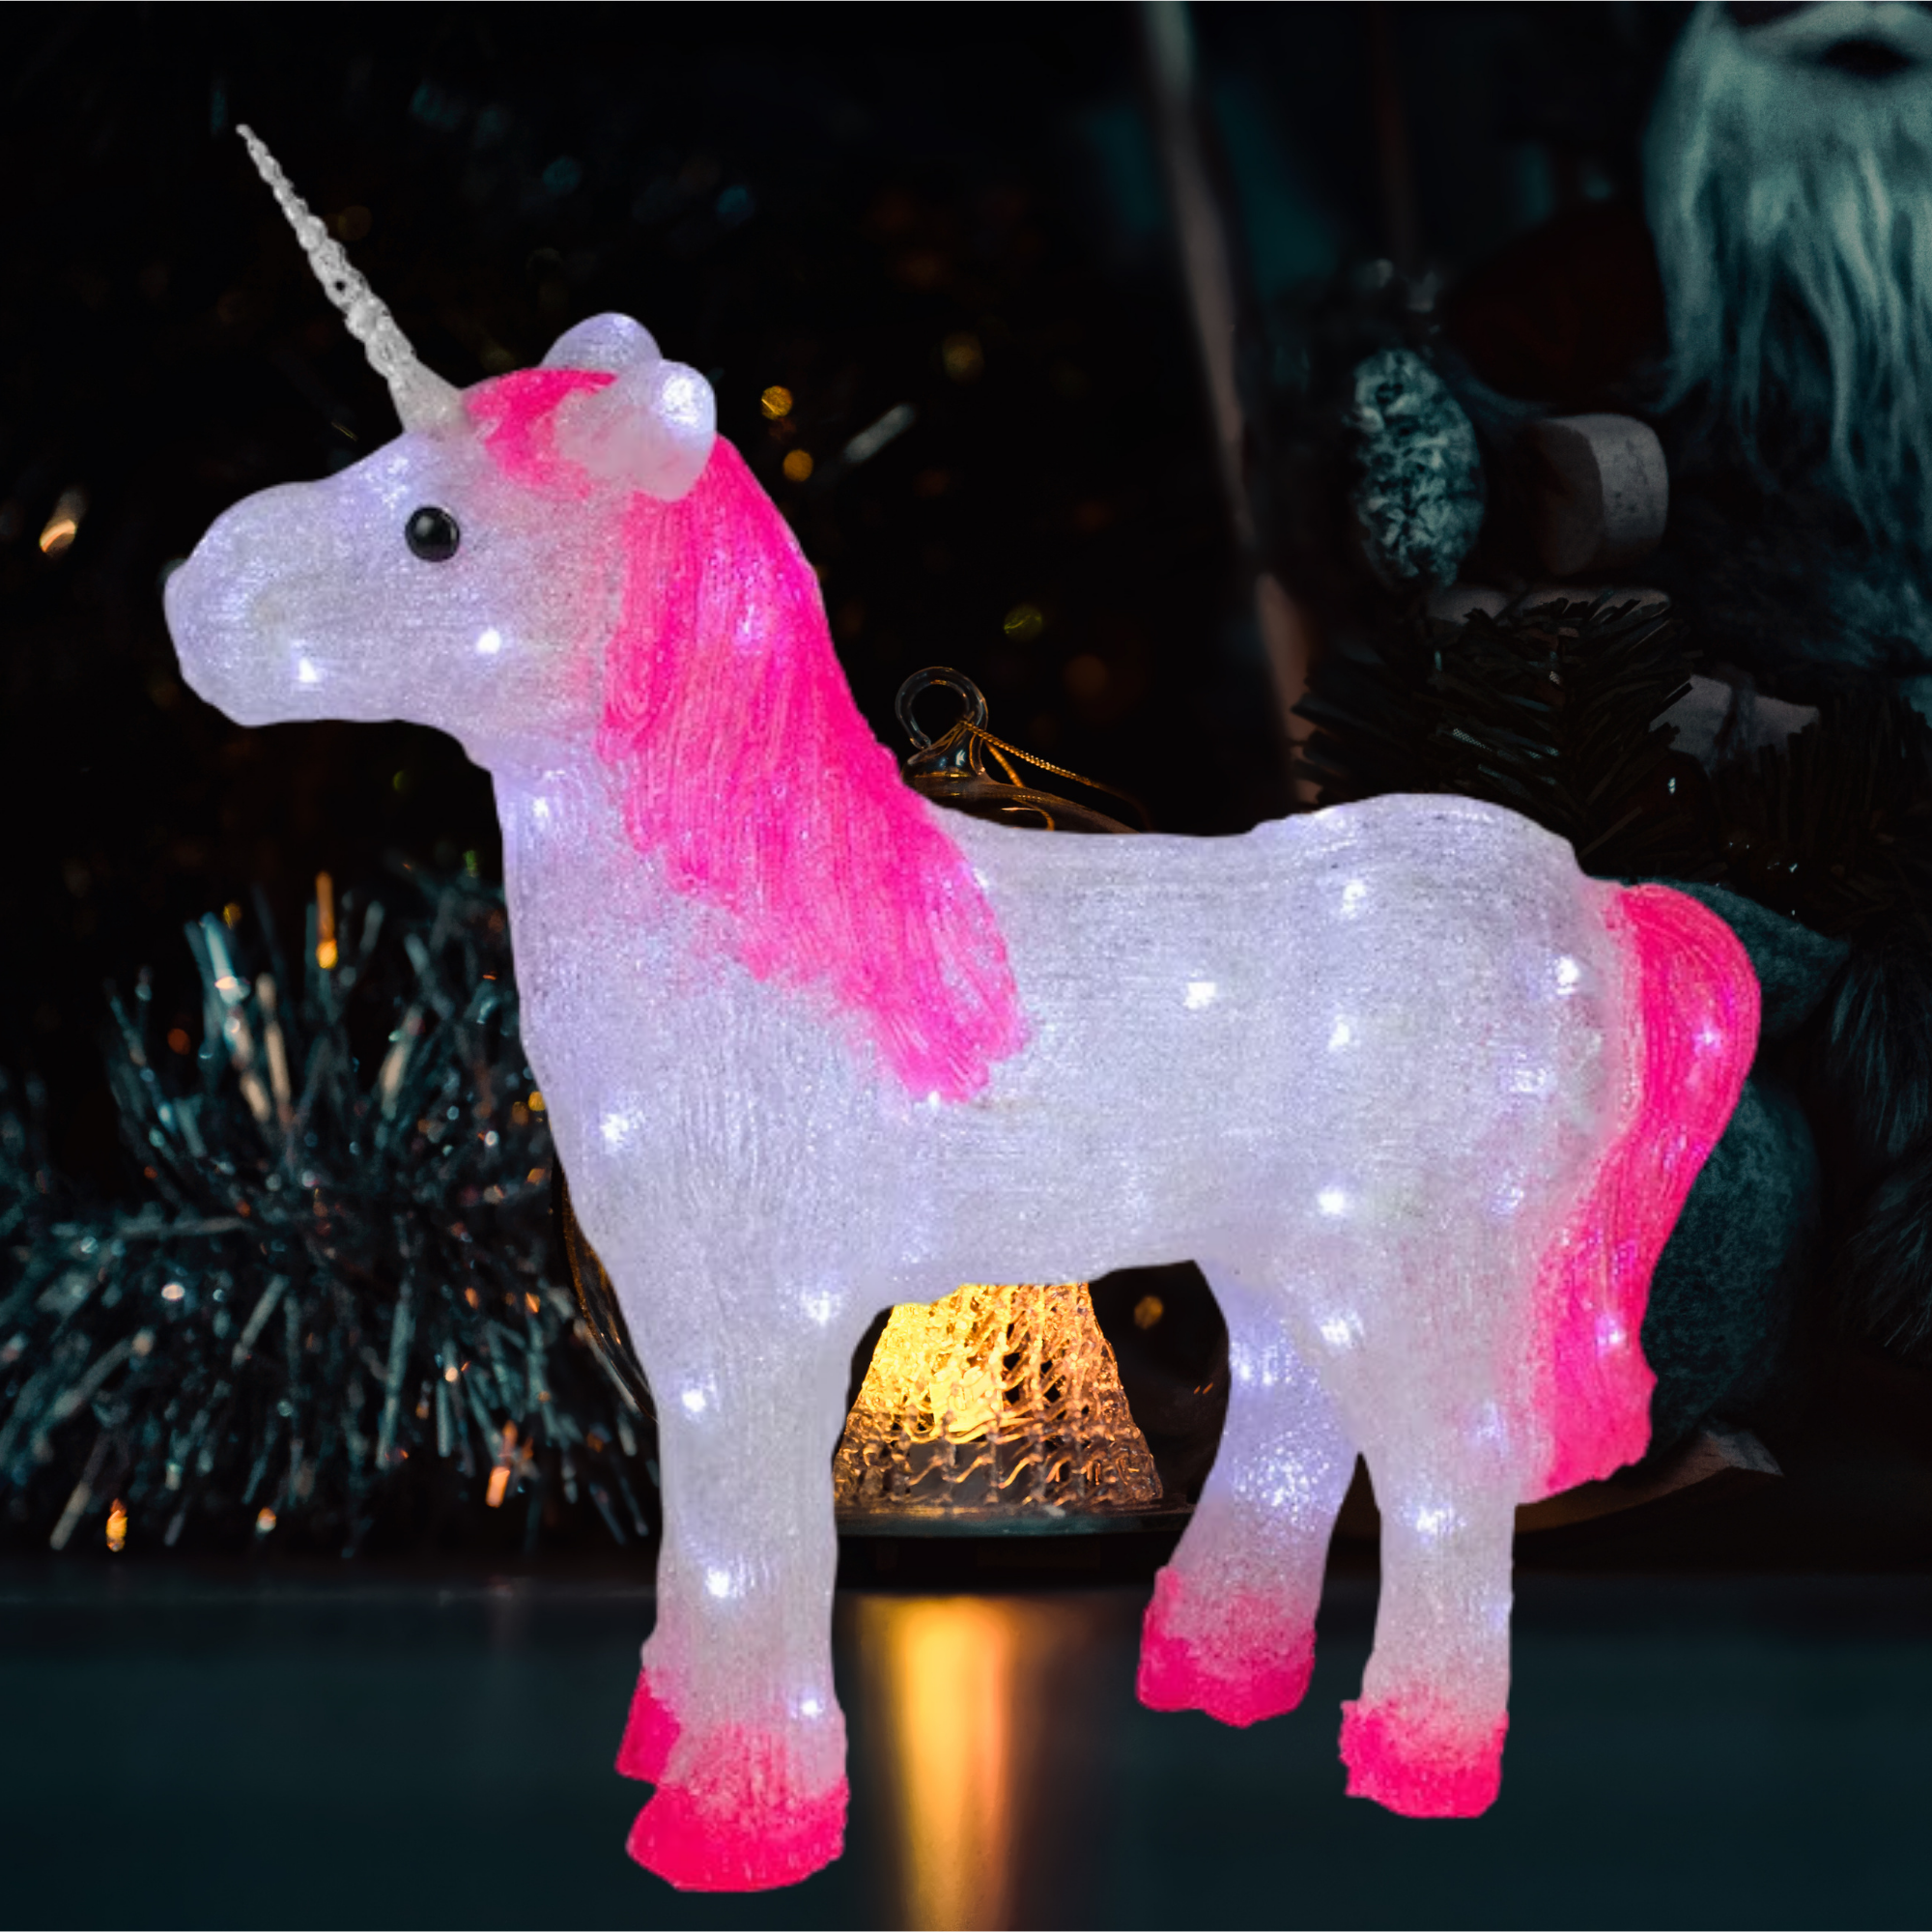 – Decoration 23-in Standing White Unicorn LED Christmas ExclusiveHalloween with Lights Free